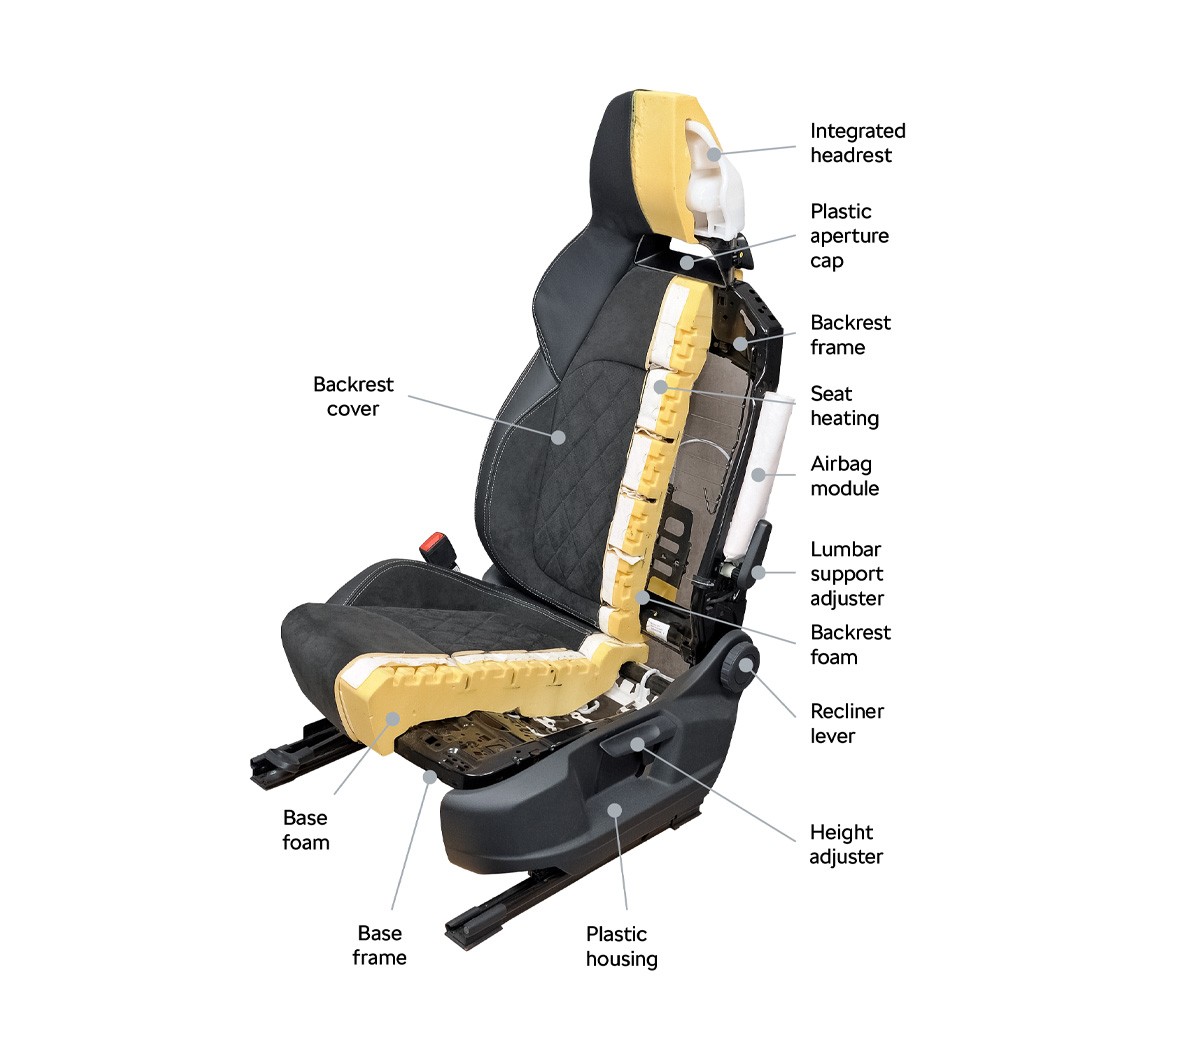 https://s1.cdn.autoevolution.com/images/news/gallery/this-is-how-car-seats-evolved-through-the-years-car-seats-now-have-more-featur_7.jpg